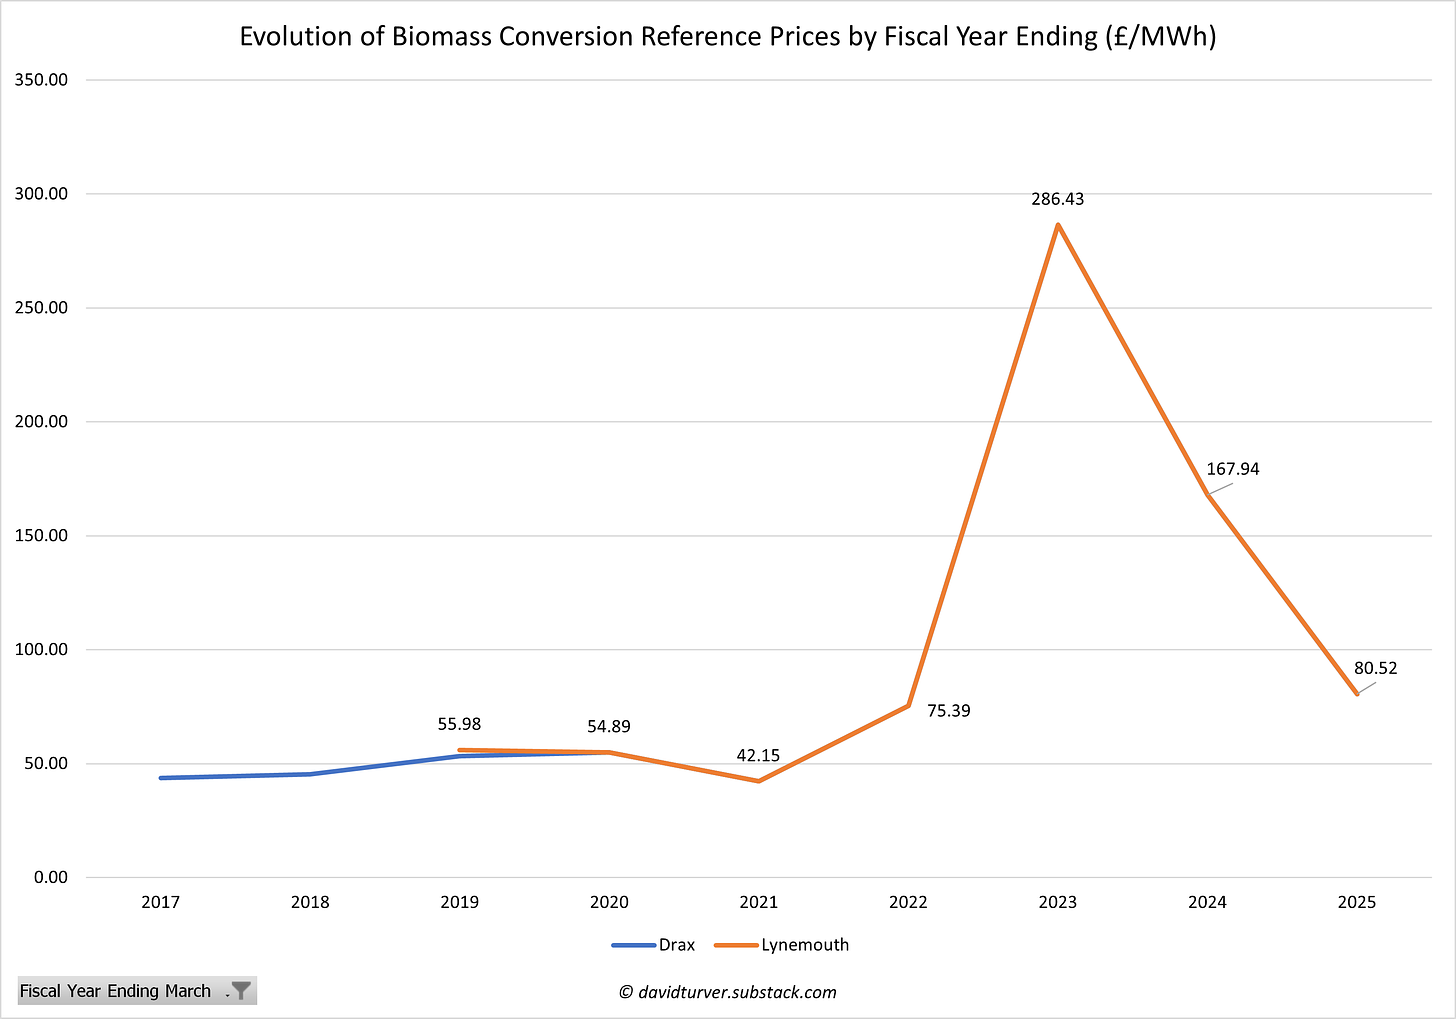 Figure 3 - Evolution of Biomass Reference Prices by FIscal Year Ending (£ per MWh)